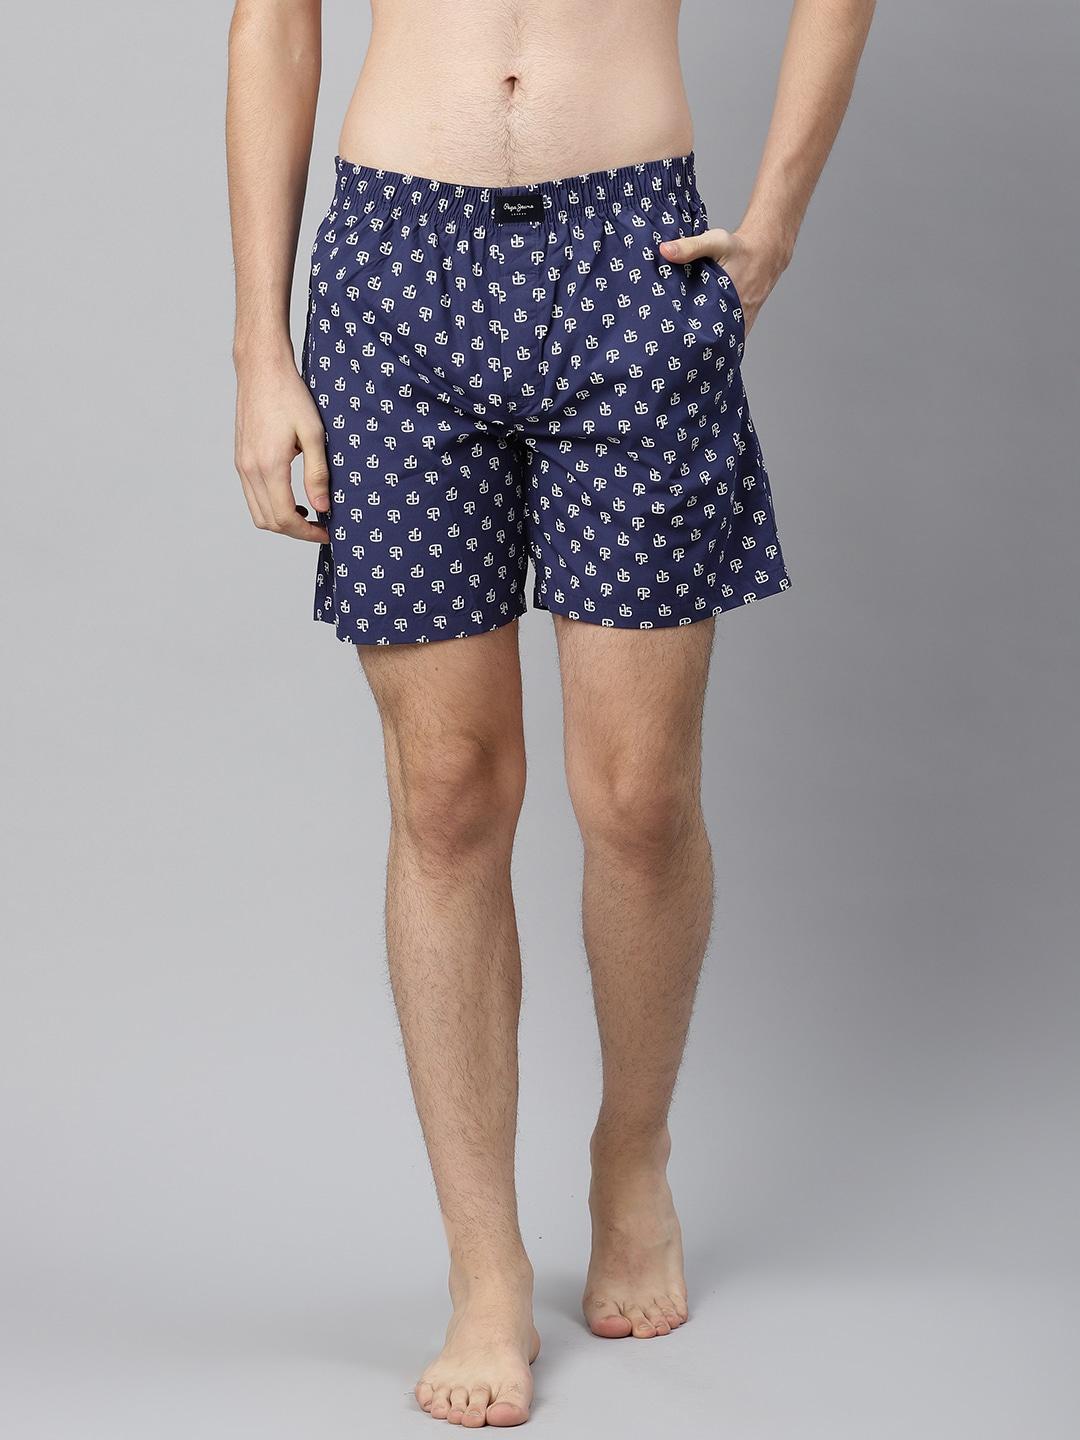 pepe-jeans-men-navy-blue-&-white-pure-cotton-printed-boxers-8904311334187